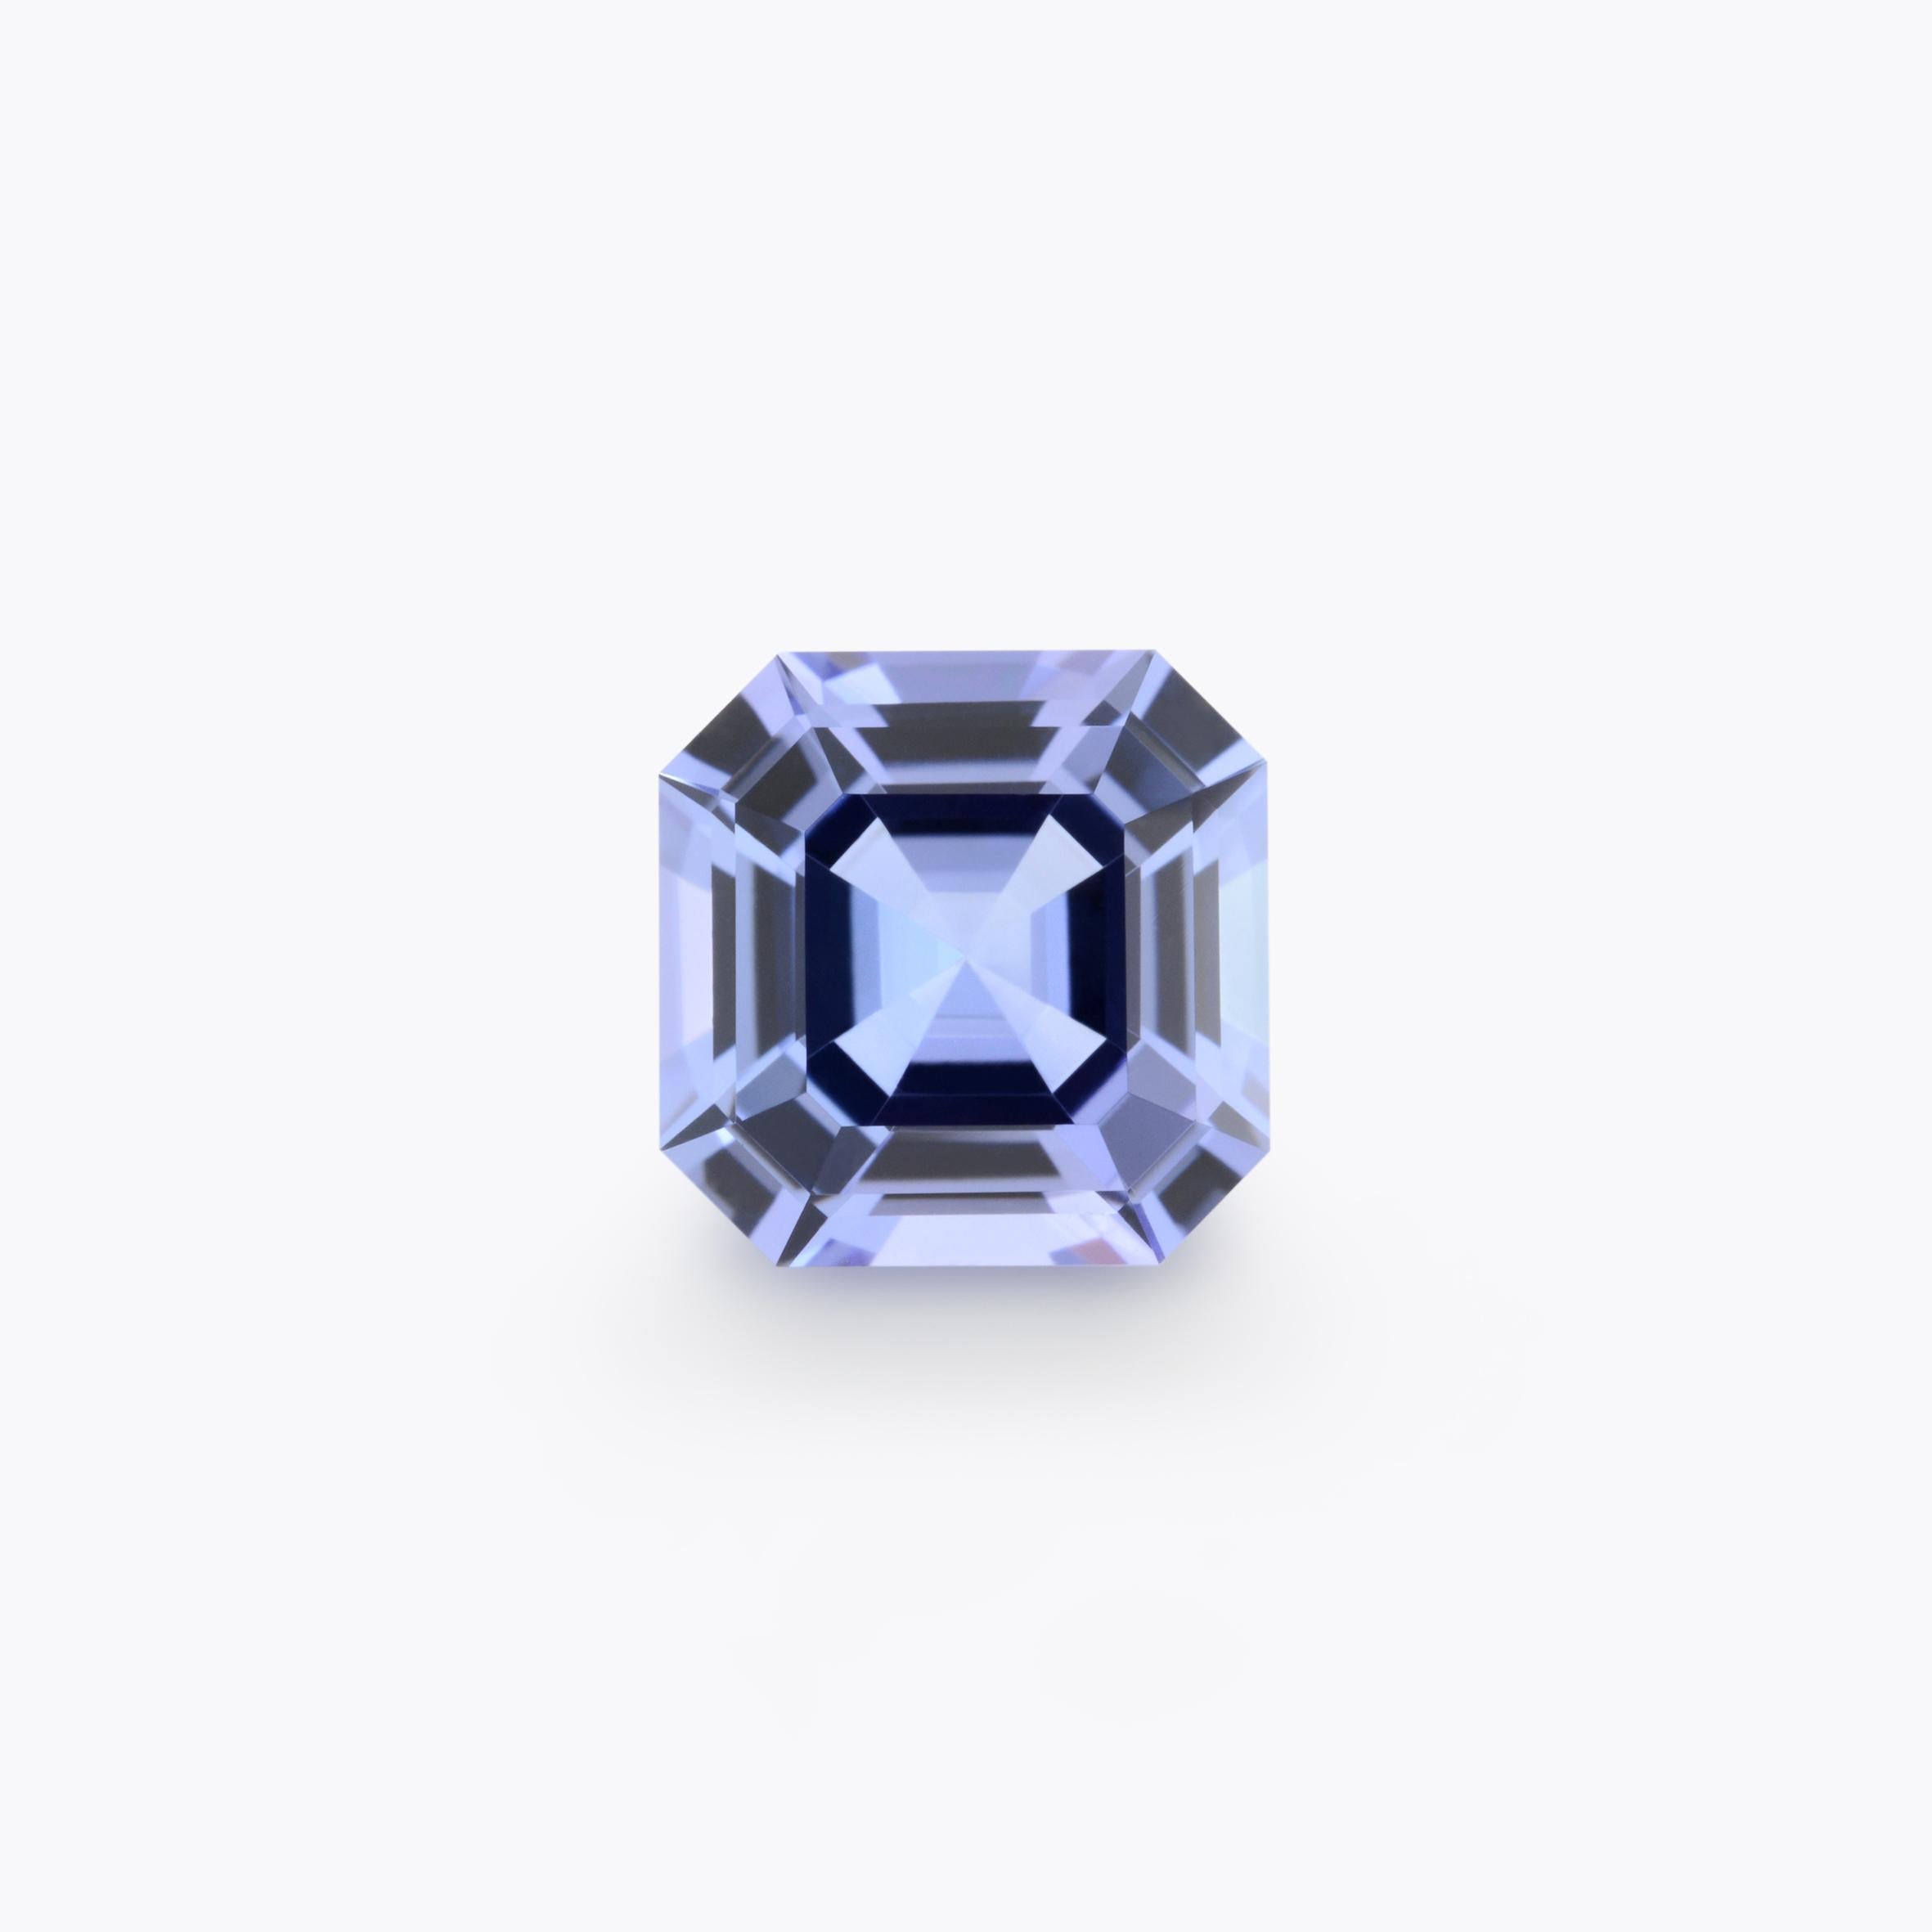 Supremely cut 3.15 carat Tanzanite square octagon loose stone, offered unmounted to someone special.
Returns are accepted and paid by us within 7 days of delivery.
We offer supreme custom jewelry work upon request. Please contact us for more